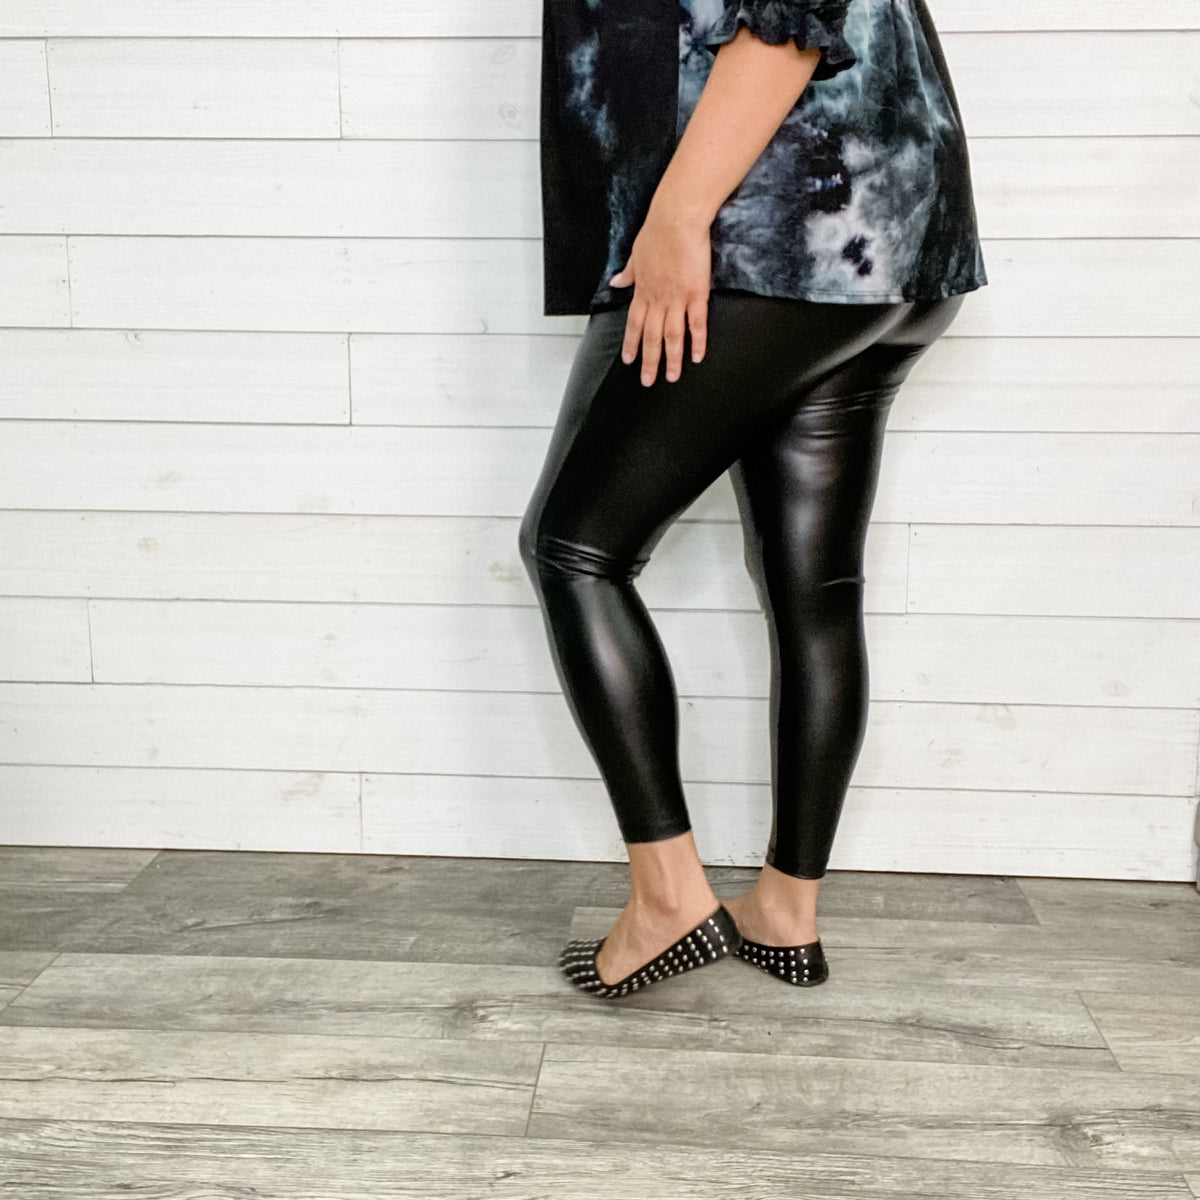 Vegan Leather "Date Night" Leggings with Wide Waist Band (Black)